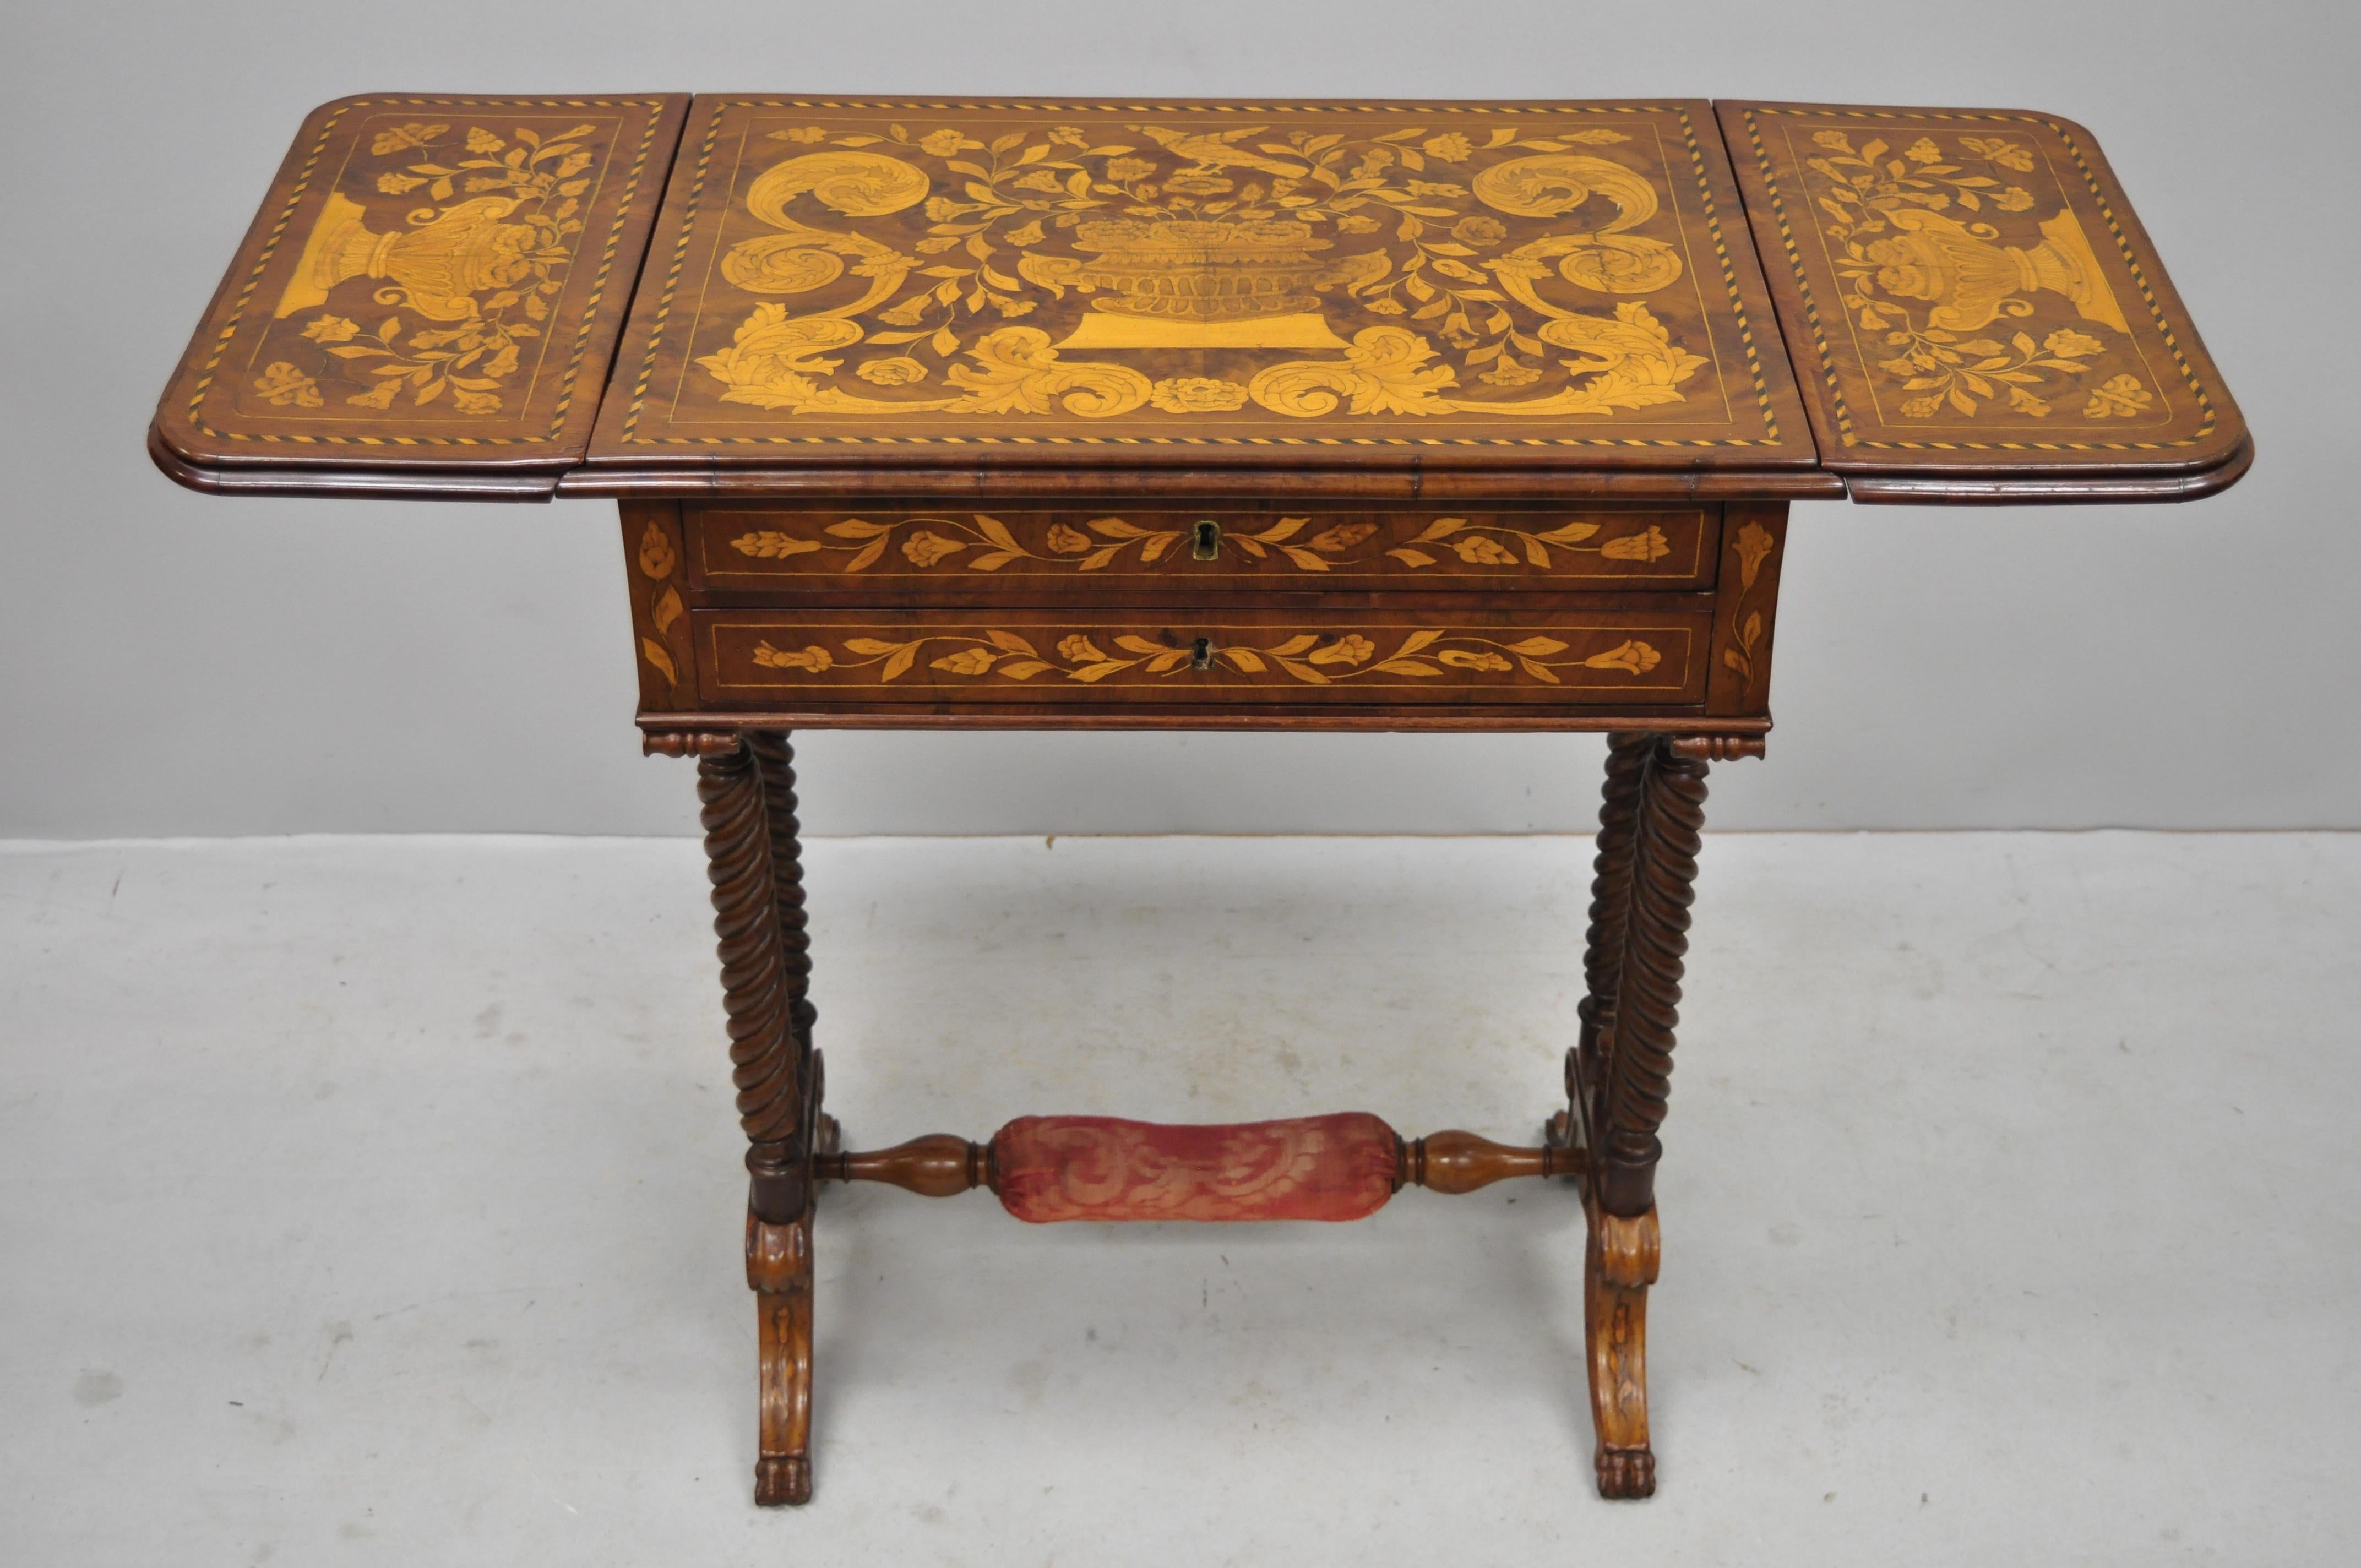 Dutch Marquetry Inlaid Regency Style Drop-Leaf Sewing Stand Work Table In Good Condition For Sale In Philadelphia, PA